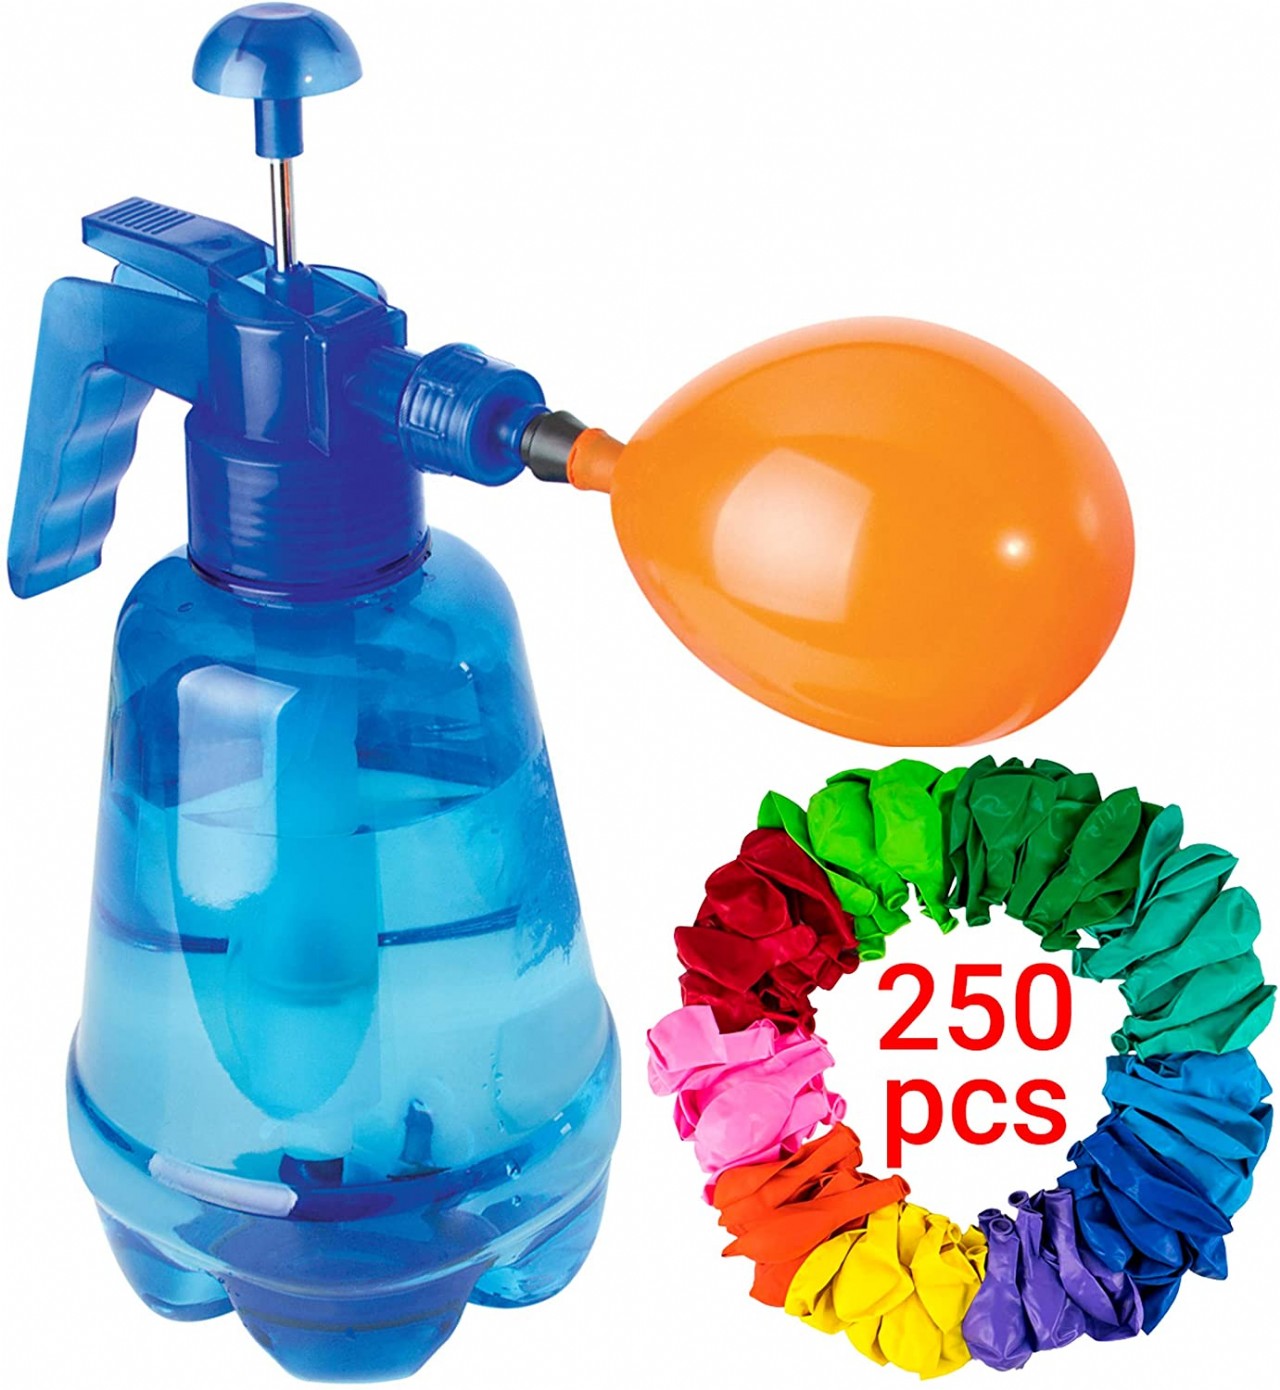 Water Balloon Pump with 250 Balloons Included - 3 in 1 Air and Water Balloon Filler Super Easy